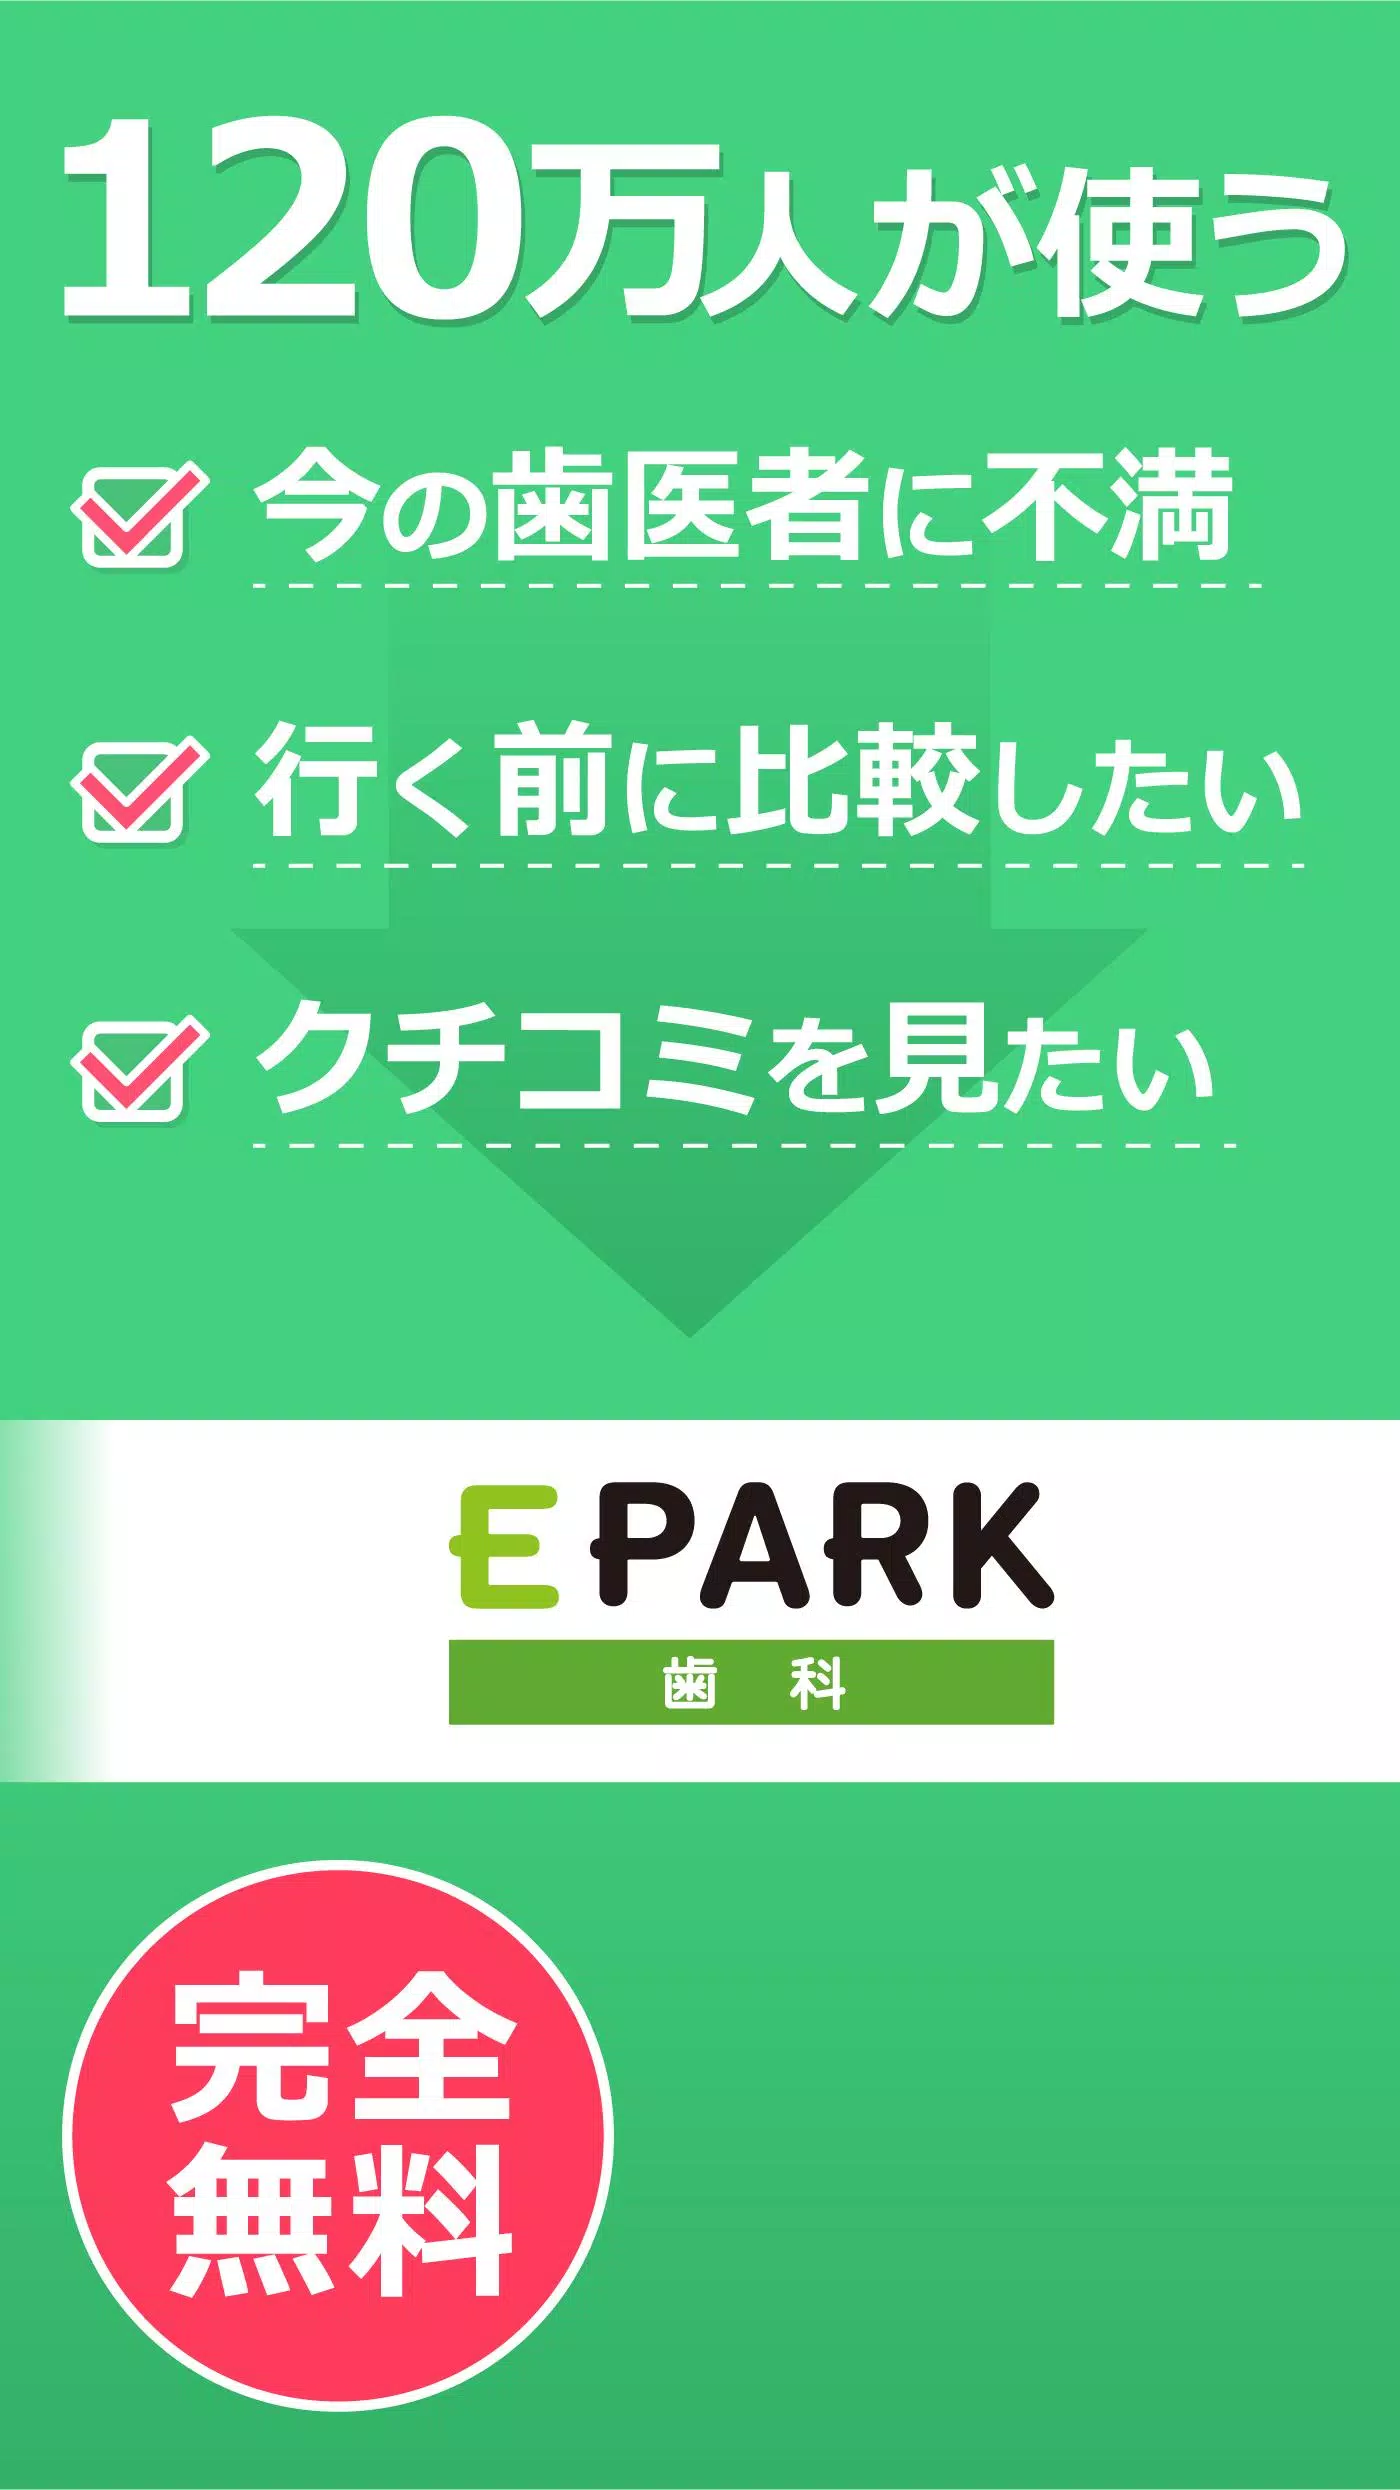 Epark歯科 イーパーク 歯医者 歯科医院無料検索アプリ Apk For Android Download